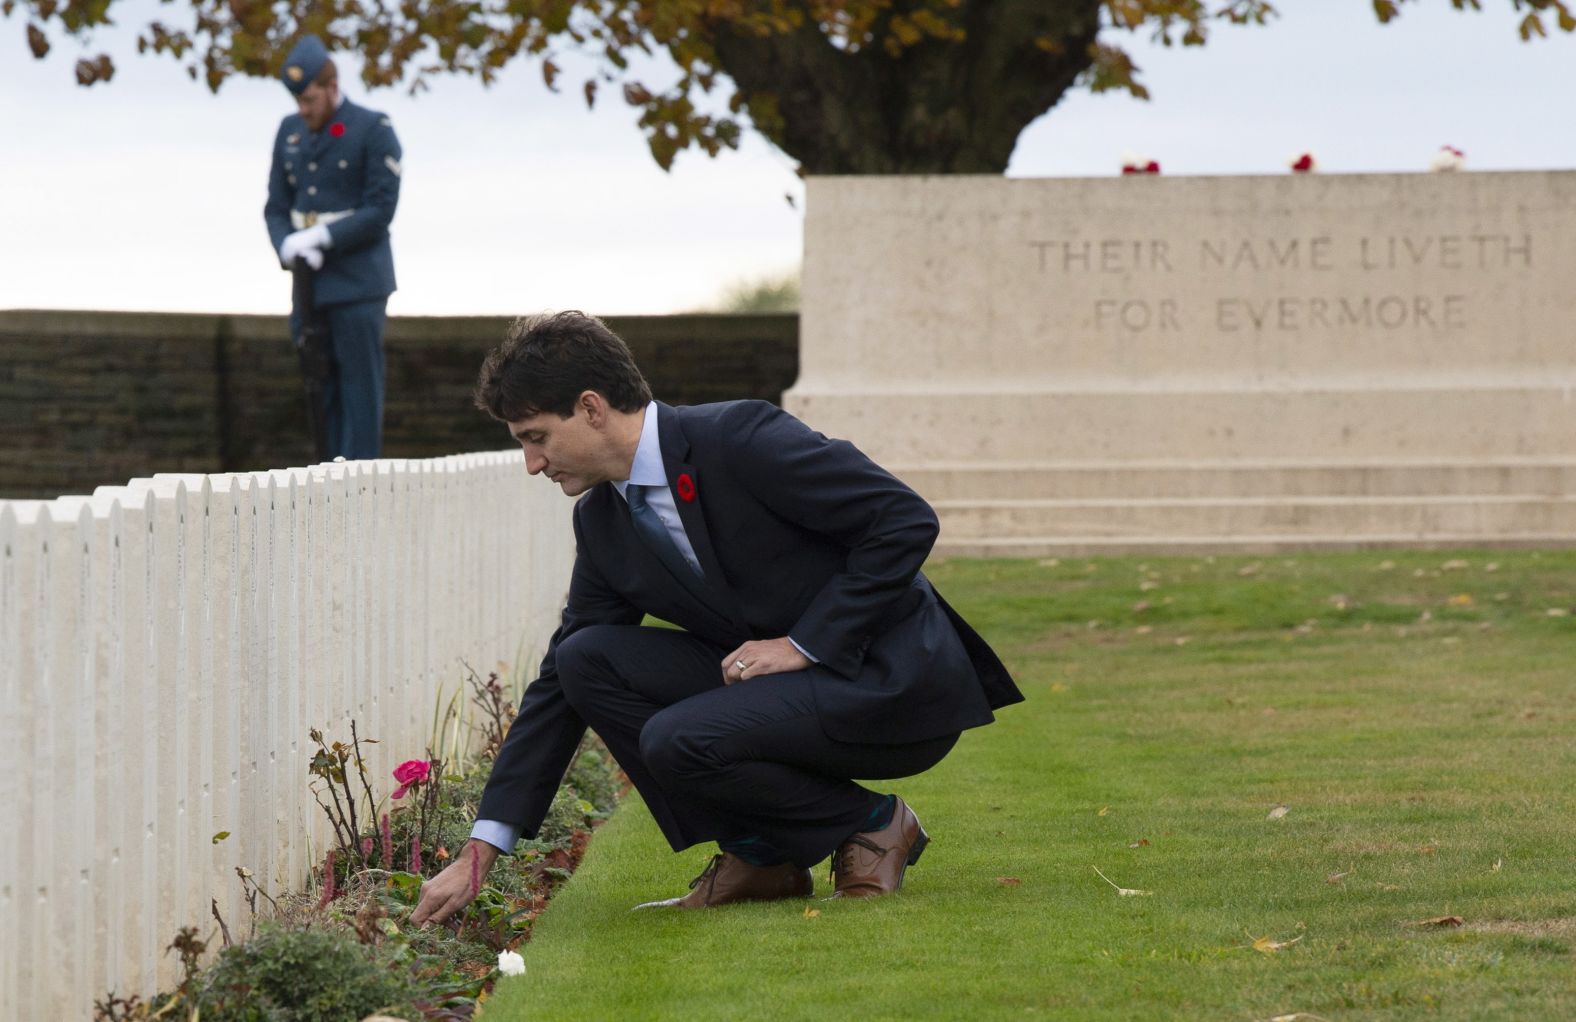 Canadian Prime Minister Justin Trudeau places a flower at a gravestone as he tours the Canadian Cemetery No. 2 near Vimy Ridge, France, on November 10.